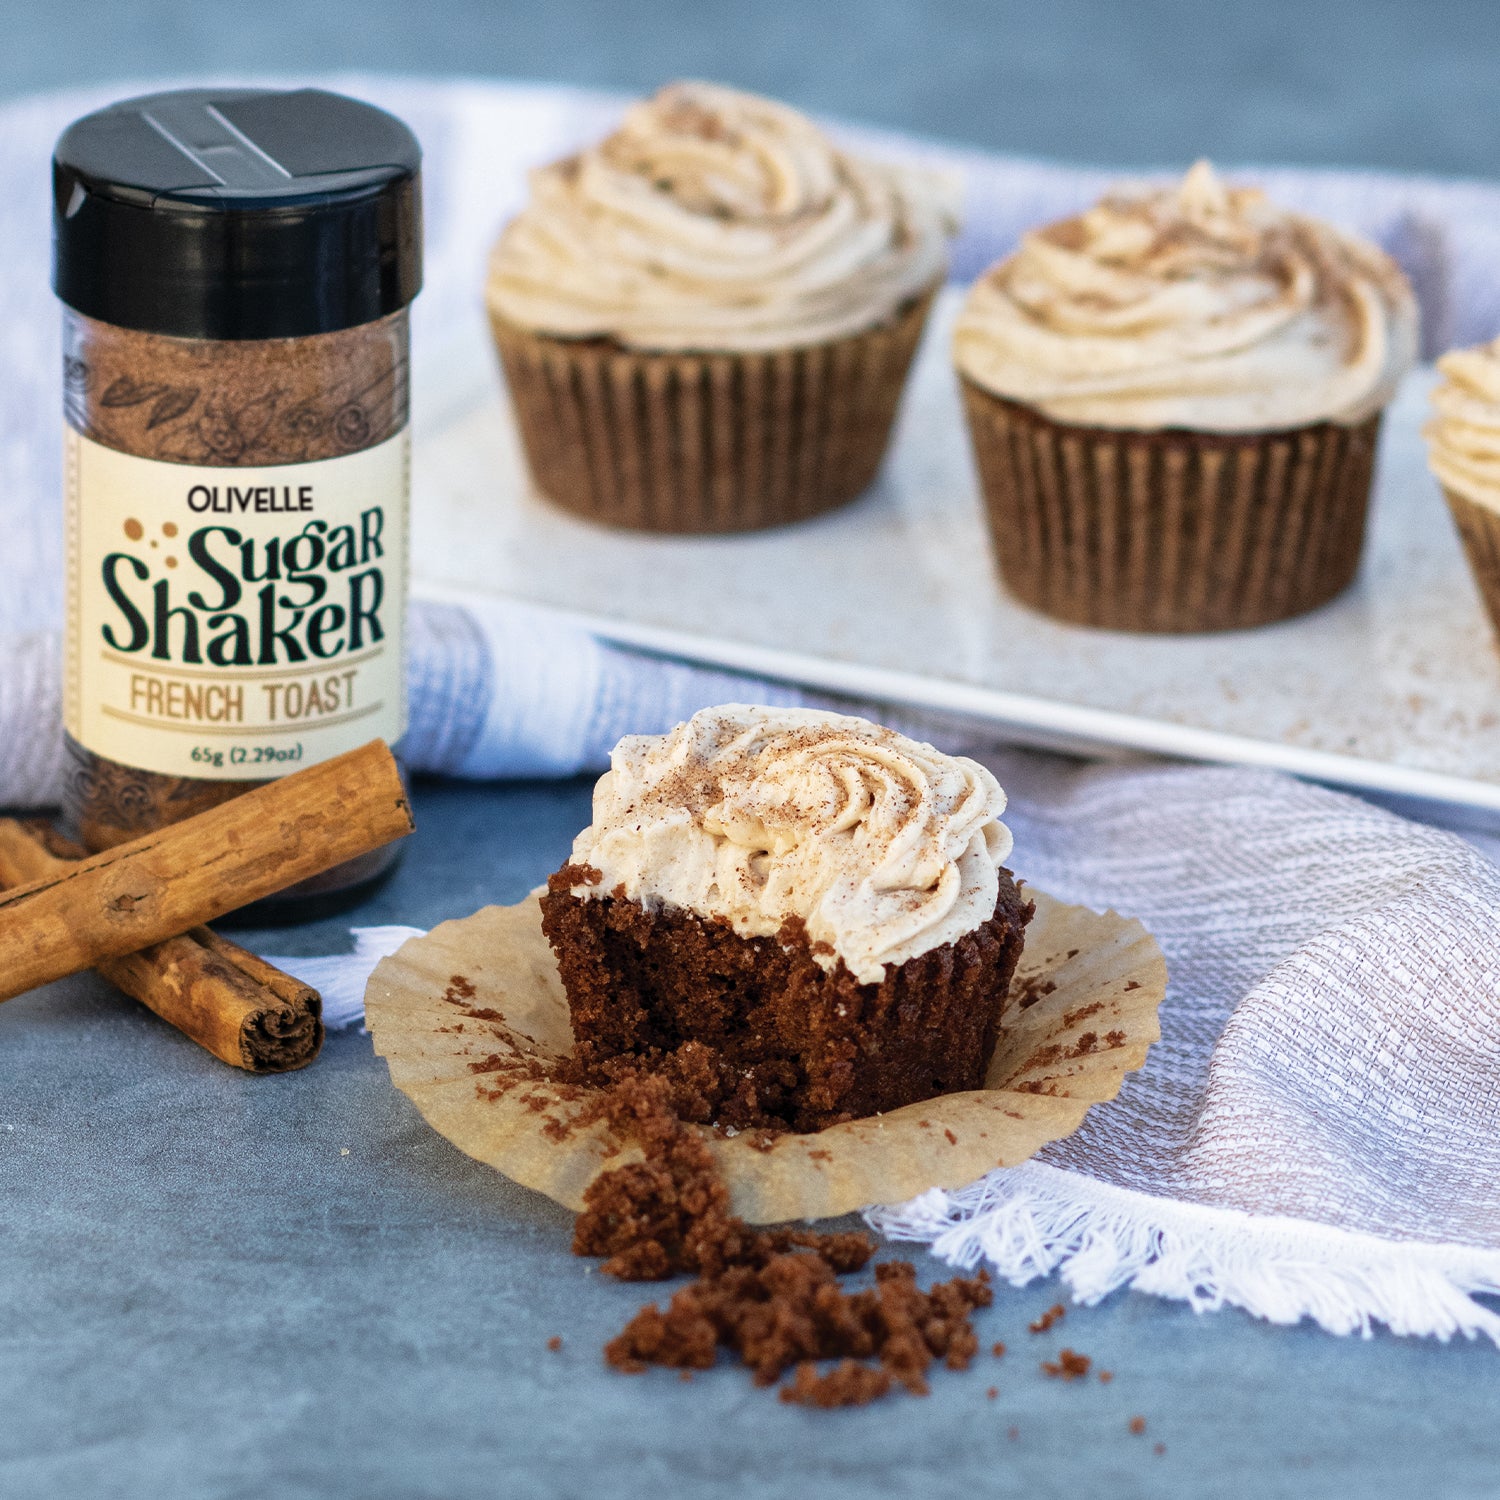 Mexican Chocolate Kahlua Cupcakes - Recipe Gift Kit